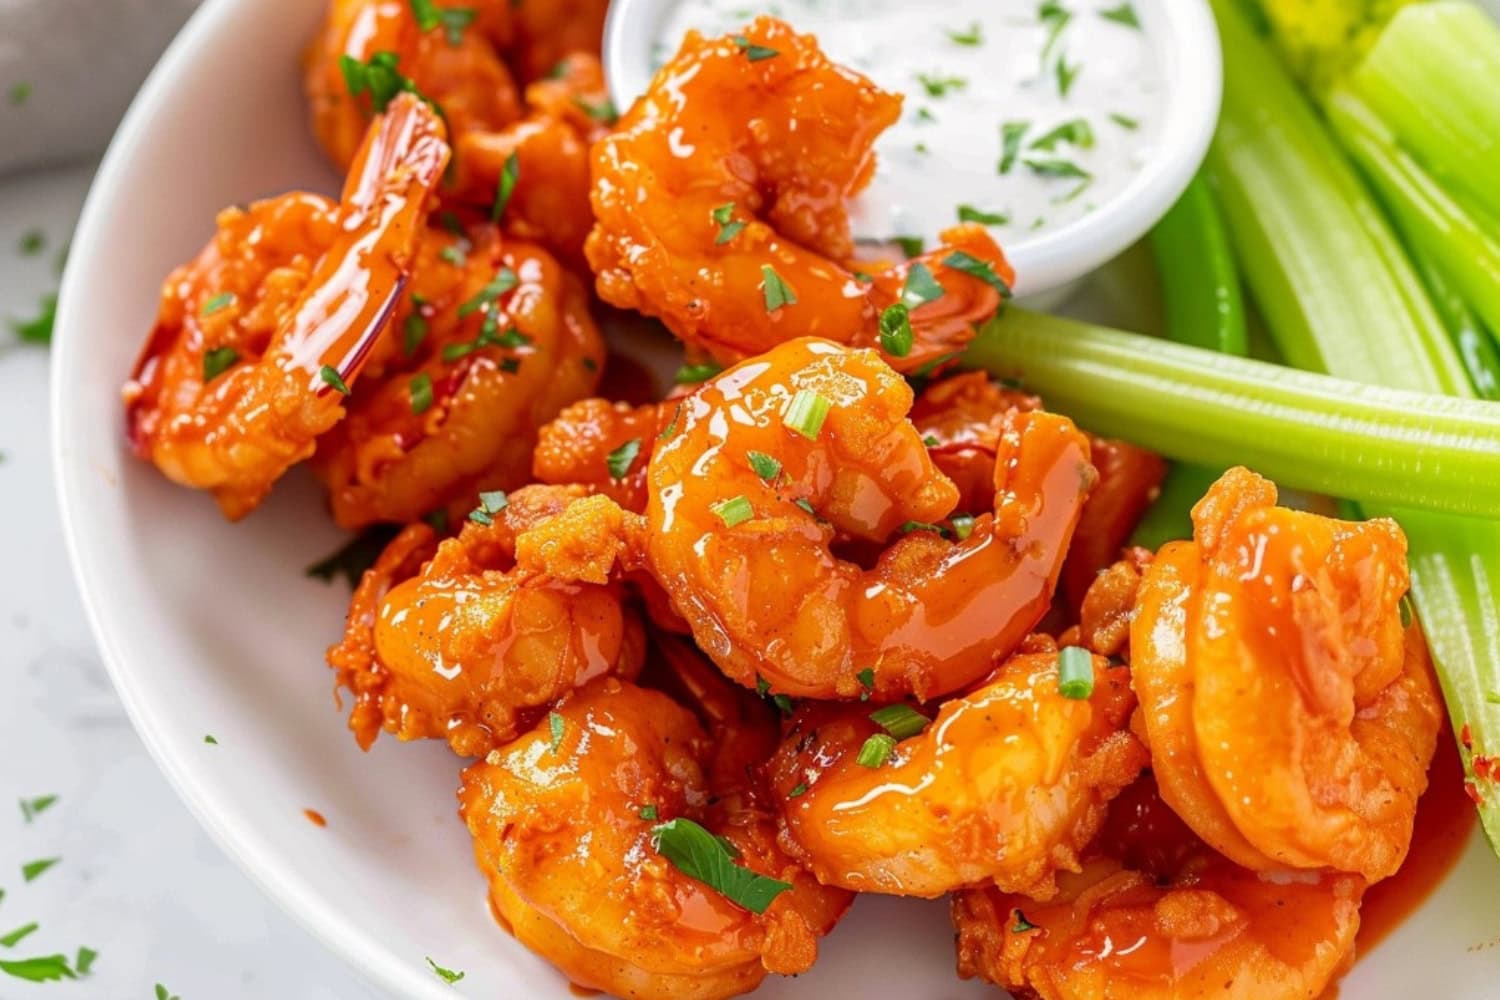 Fried shrimp in buffalo sauce served with ranch dressing and celery sticks.